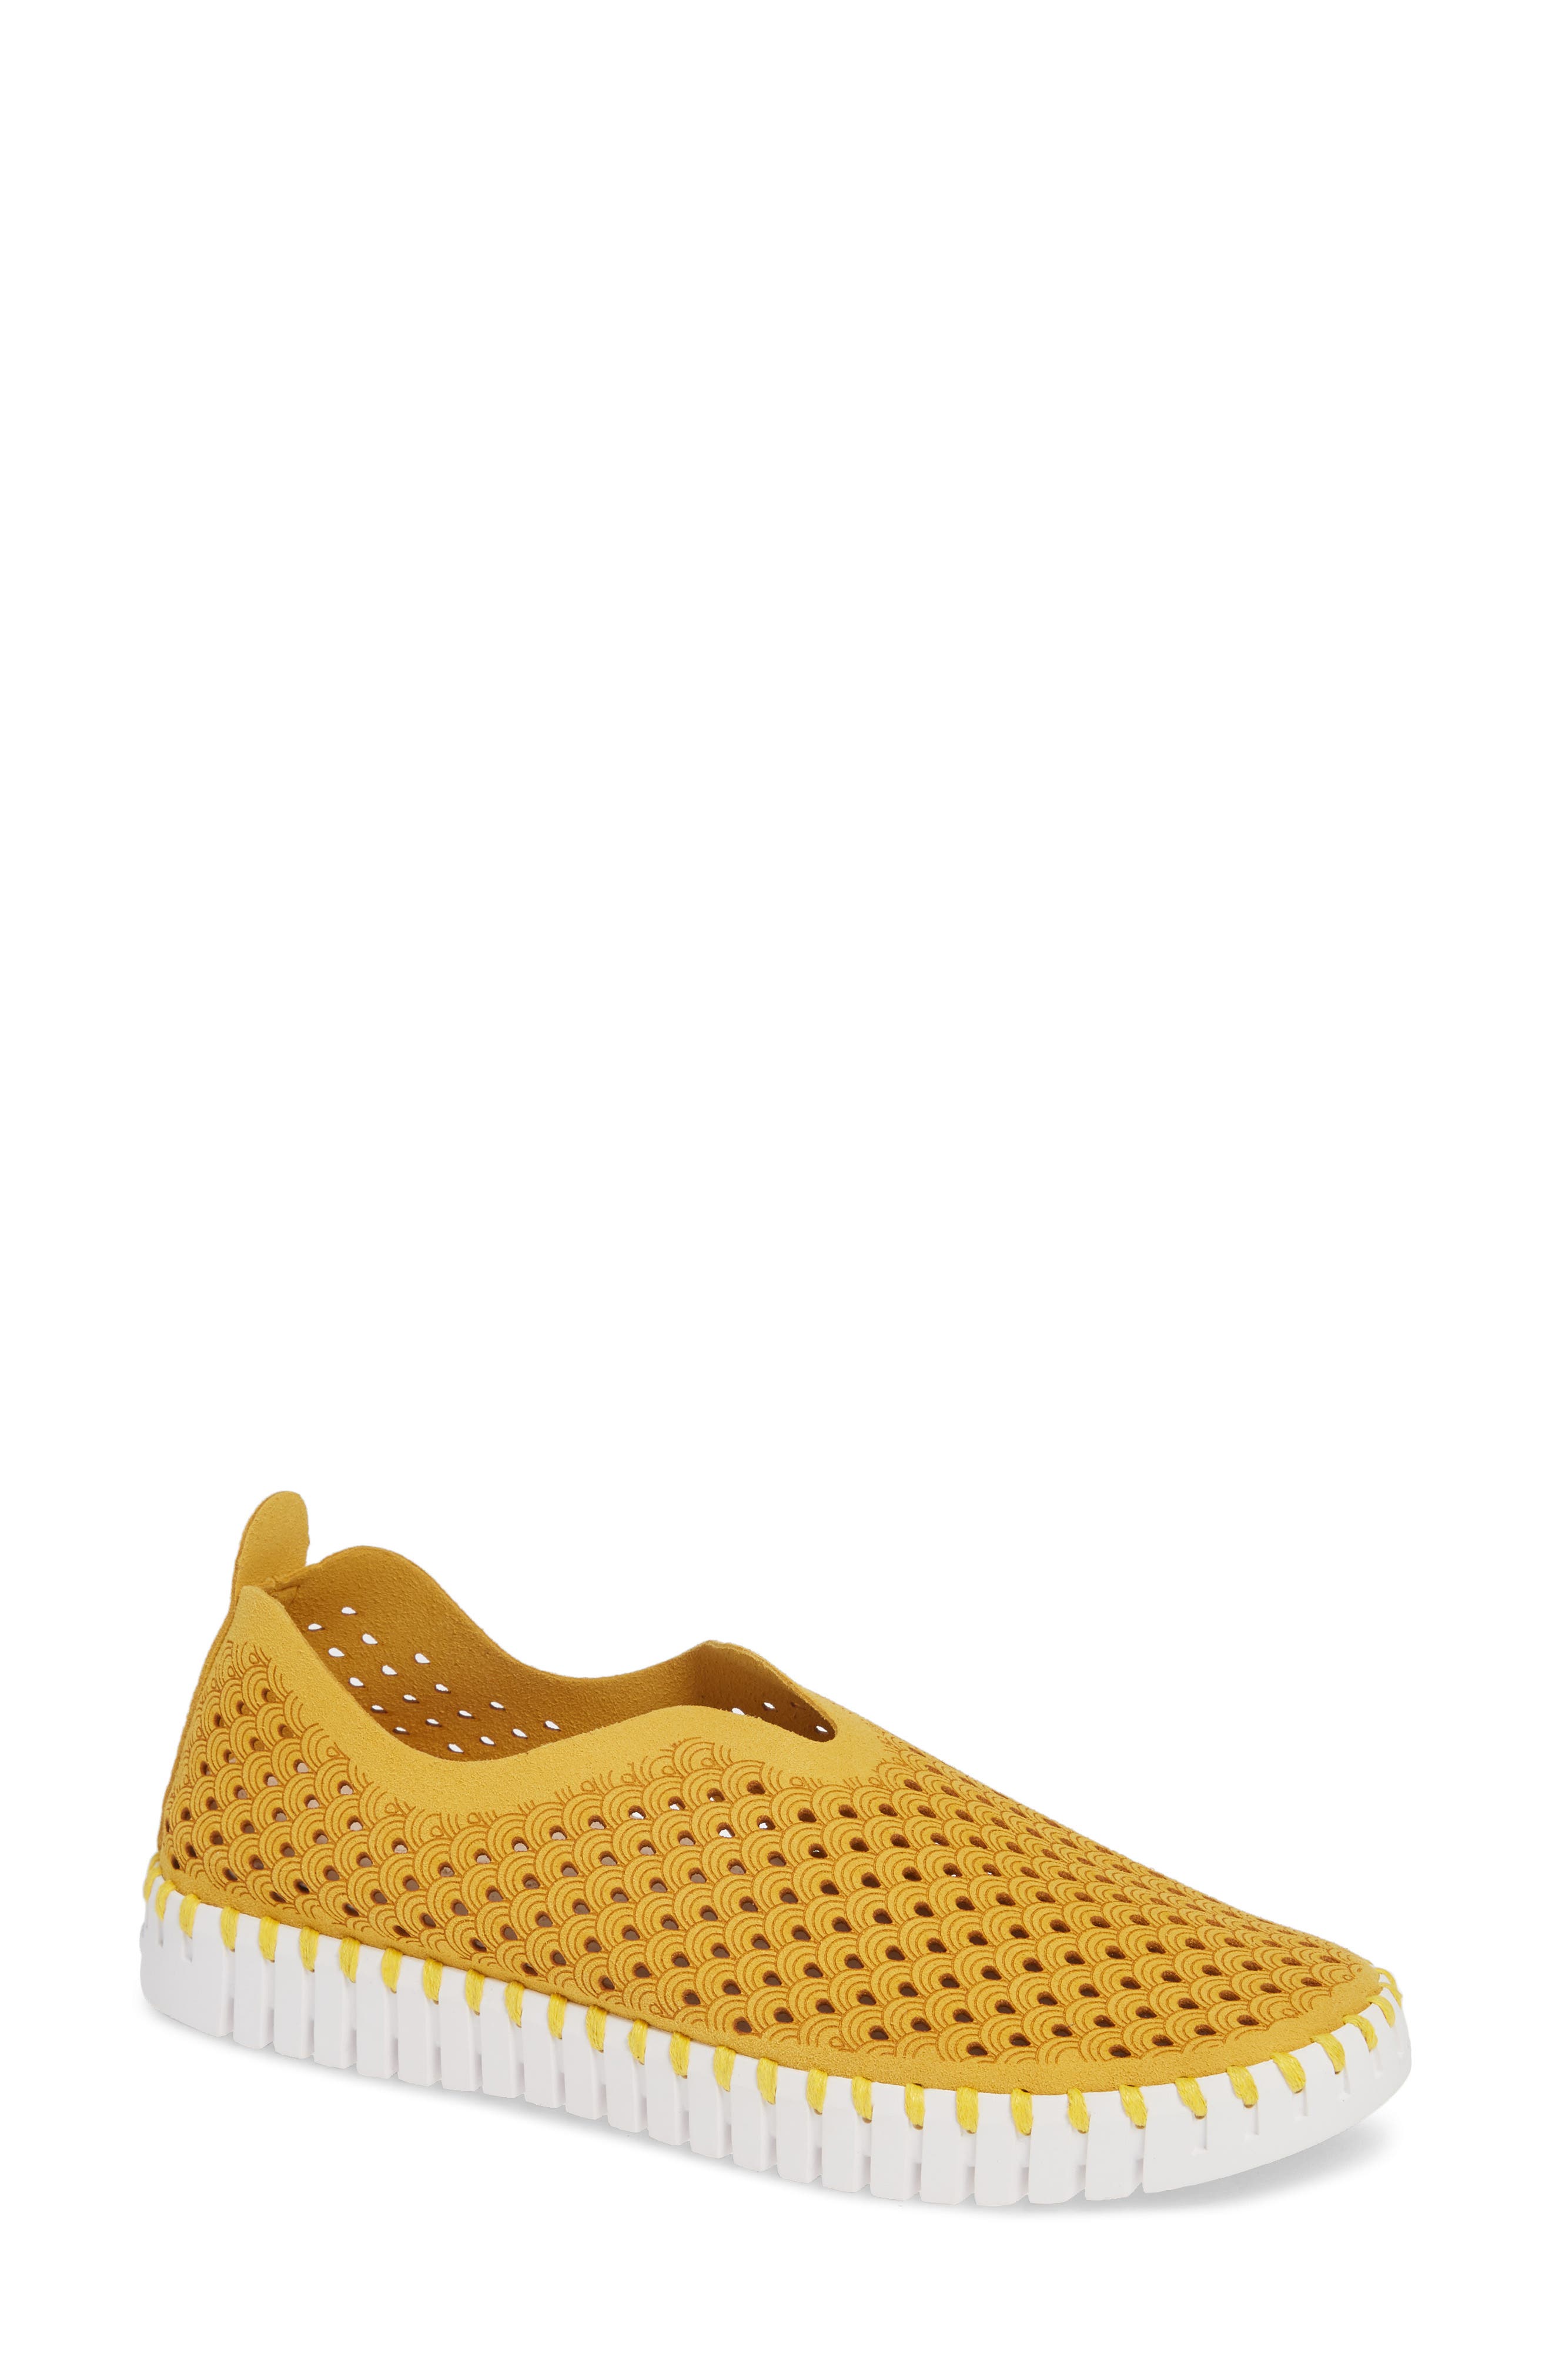 yellow slip on shoes womens